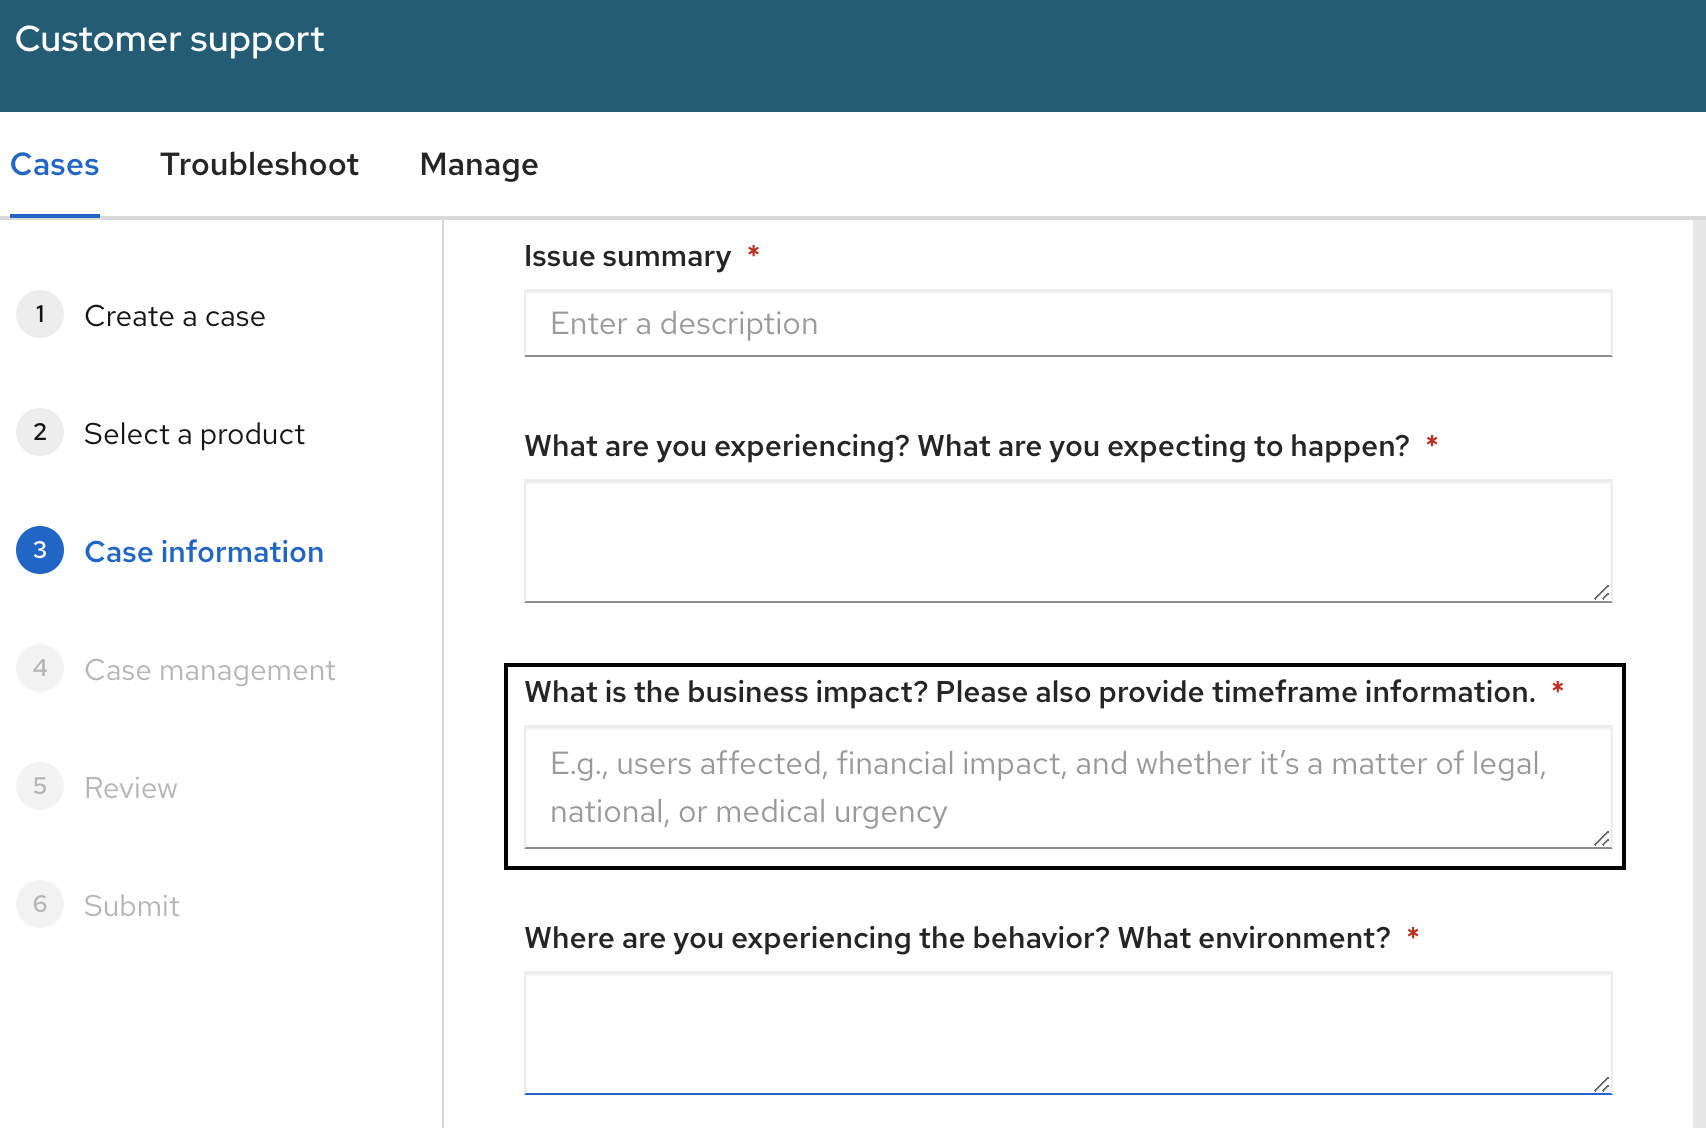 Better Understanding the Business Impact of Customer Support Cases